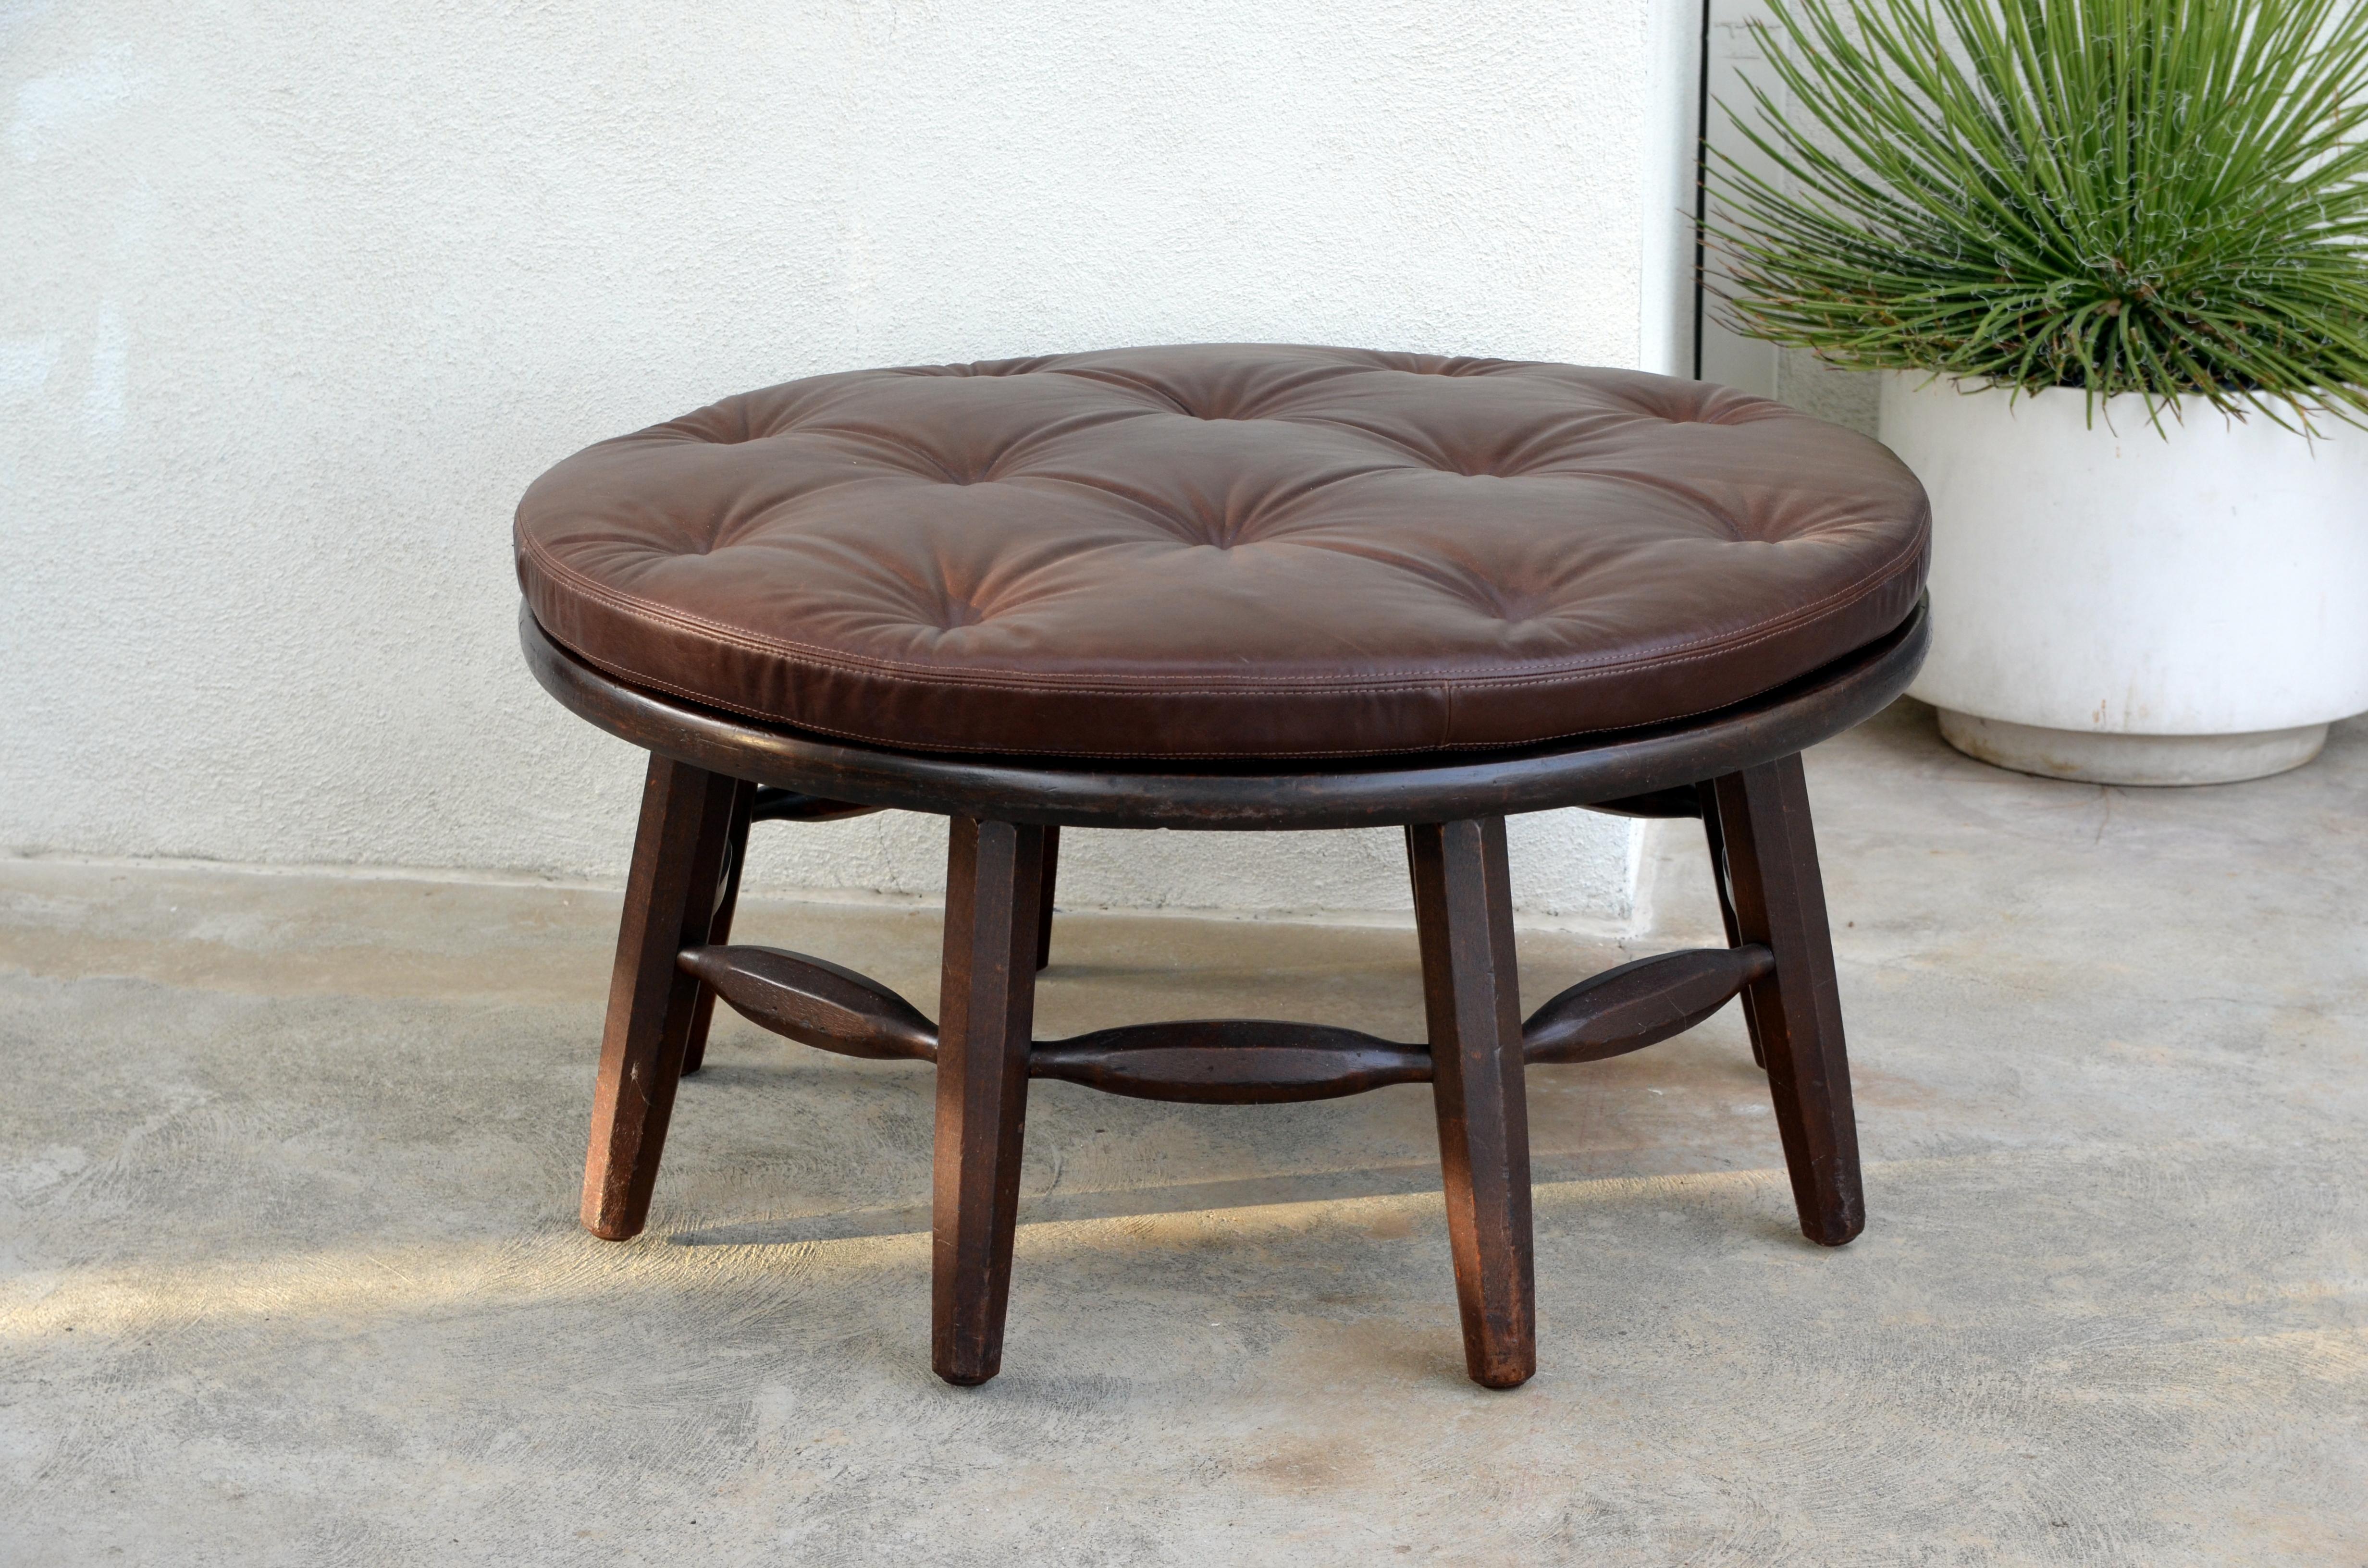 Rare original round Monterey coffee table or ottoman. Branded MONTEREY under the top.

A removable custom leather cushion is included to use this coffee table as an ottoman.

Measures: 17.5 in. tall / 20 in. tall with the cushion.
H2 17.5.